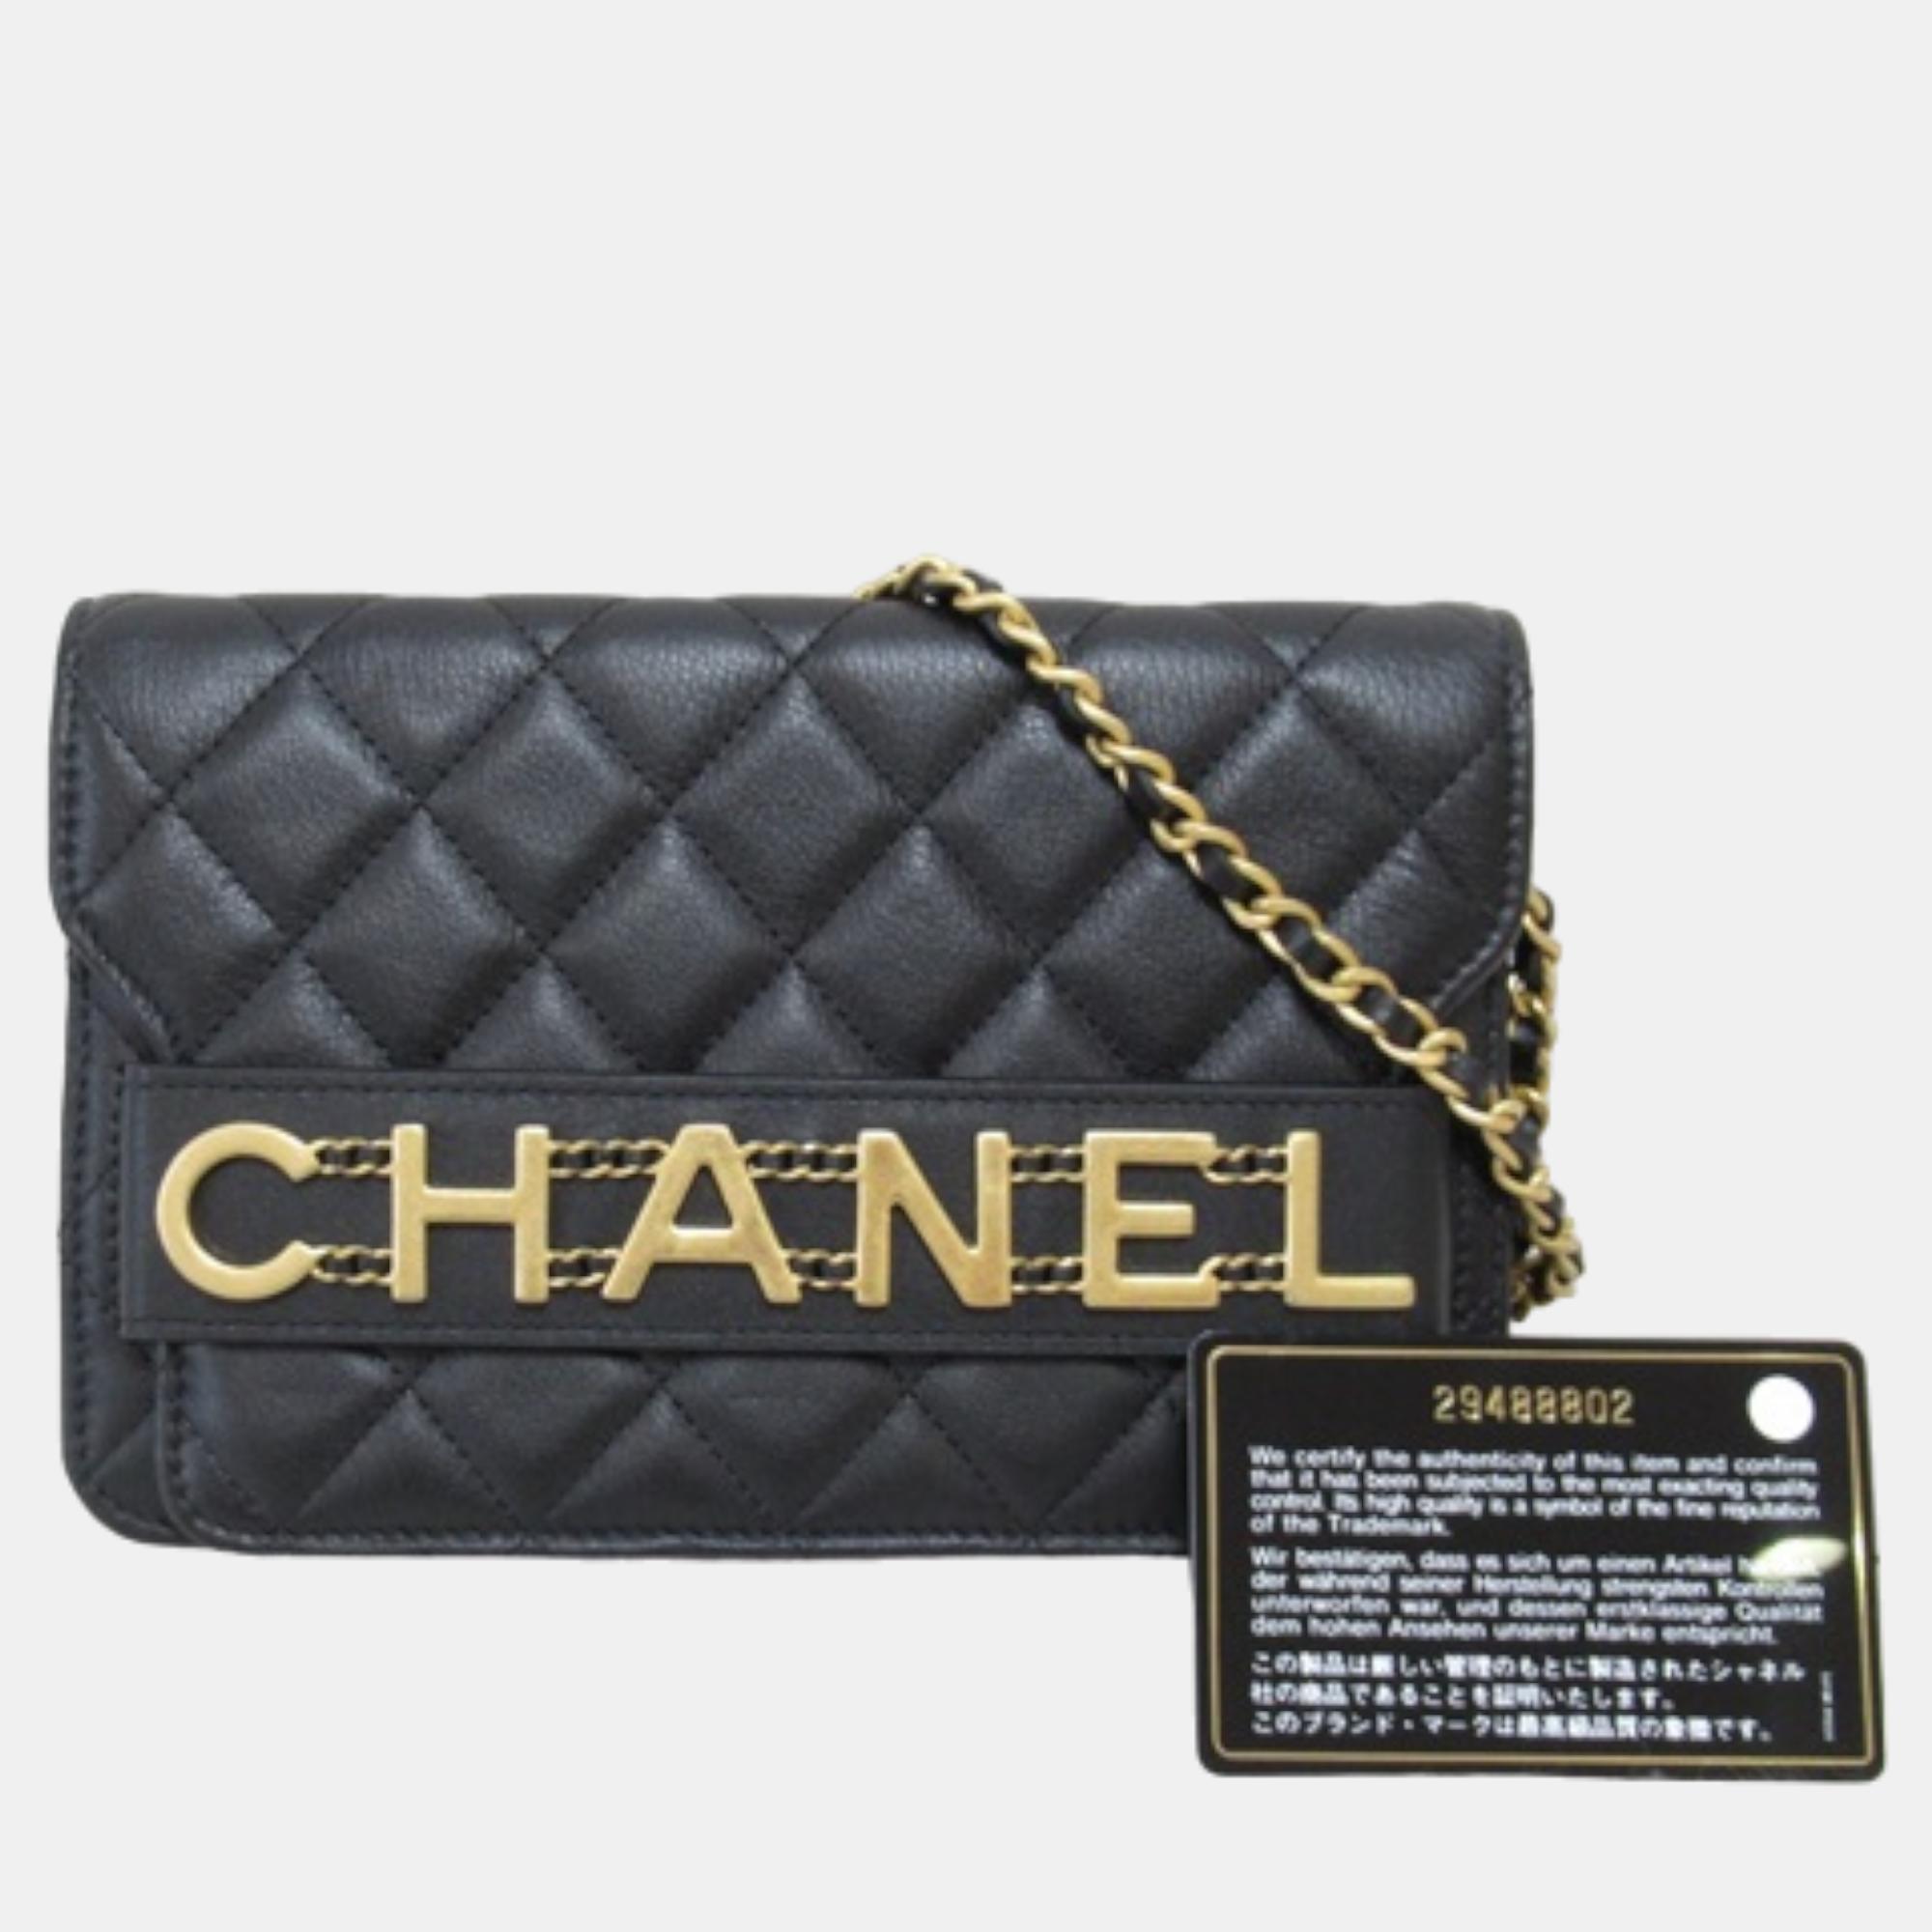 Chanel Black Leather Logo Enchained Flap Bag